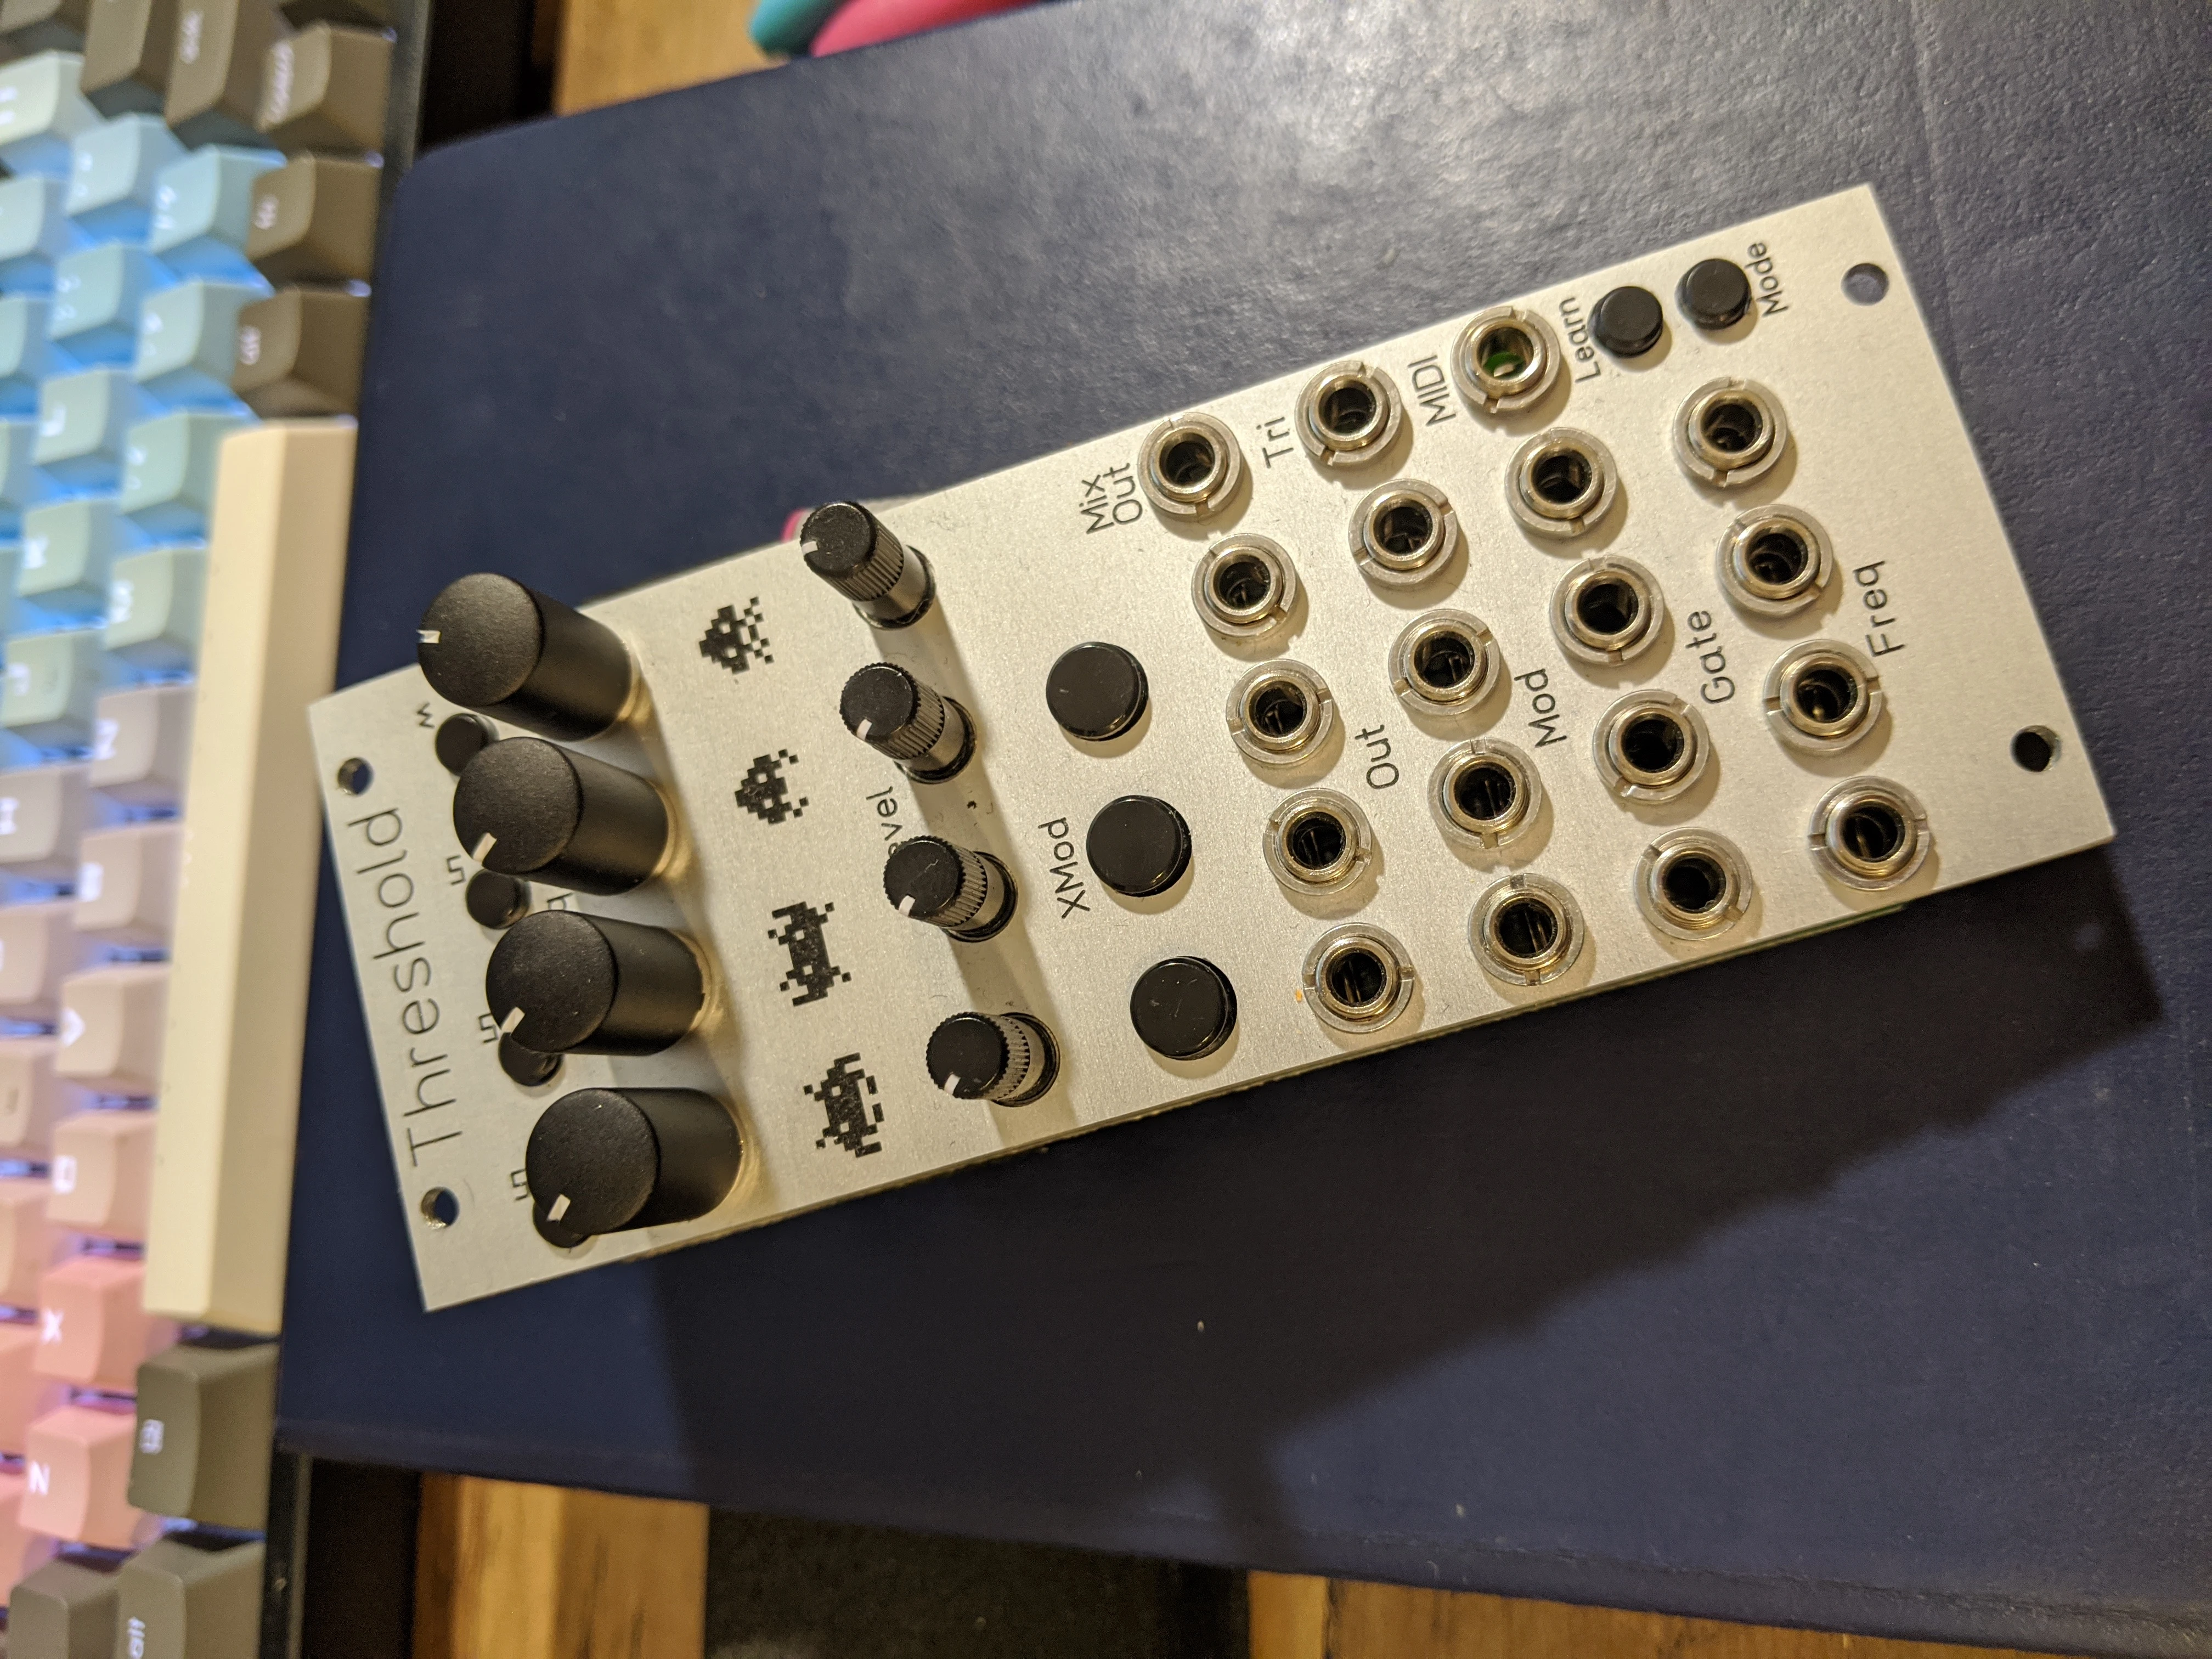 A Threshold module, outside of the synthesizer.